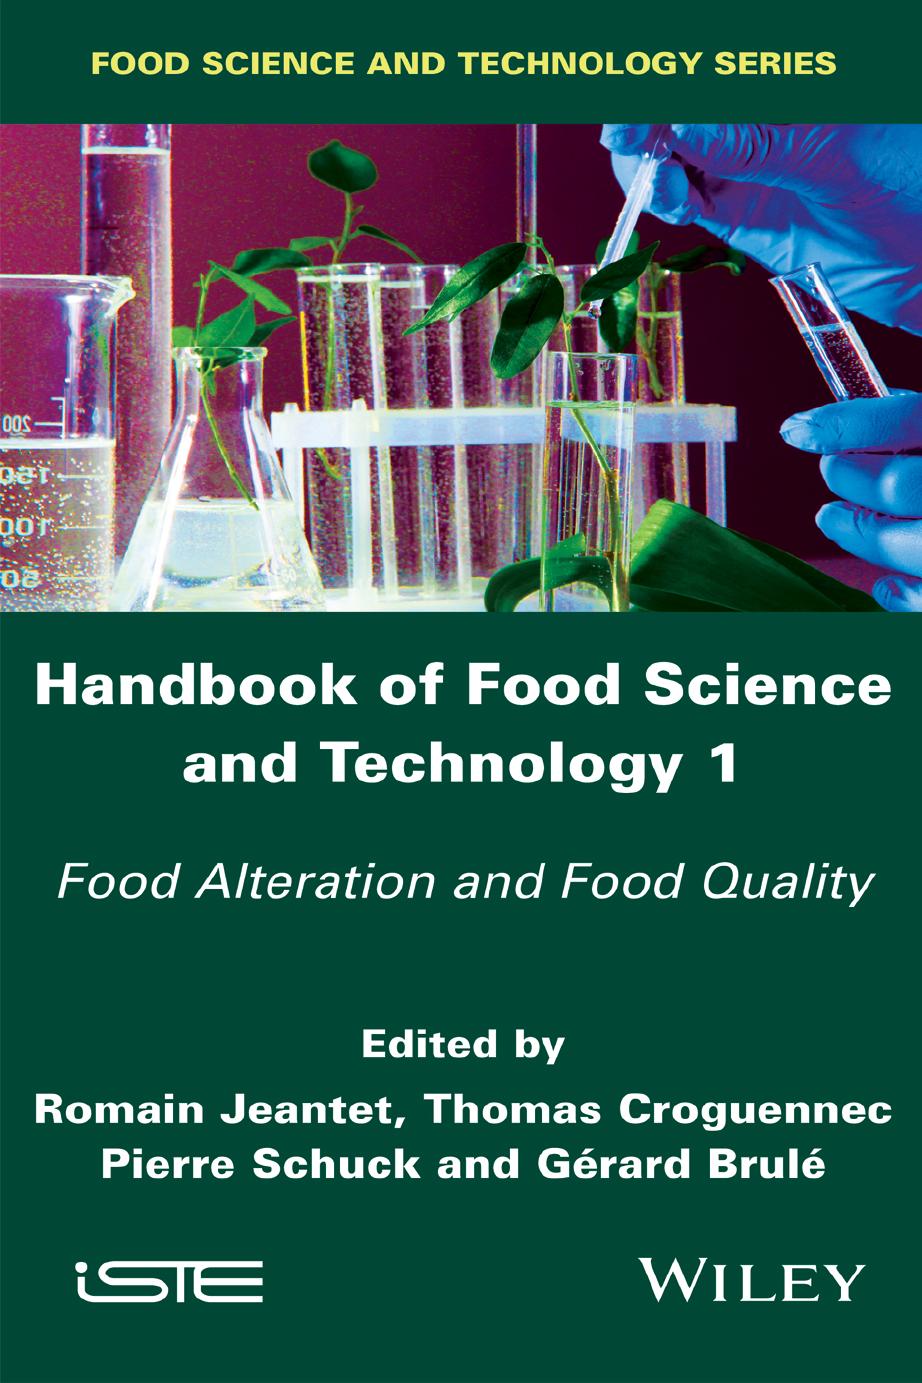 Handbook of Food Science and Technology 1: Food Alteration and Food Quality